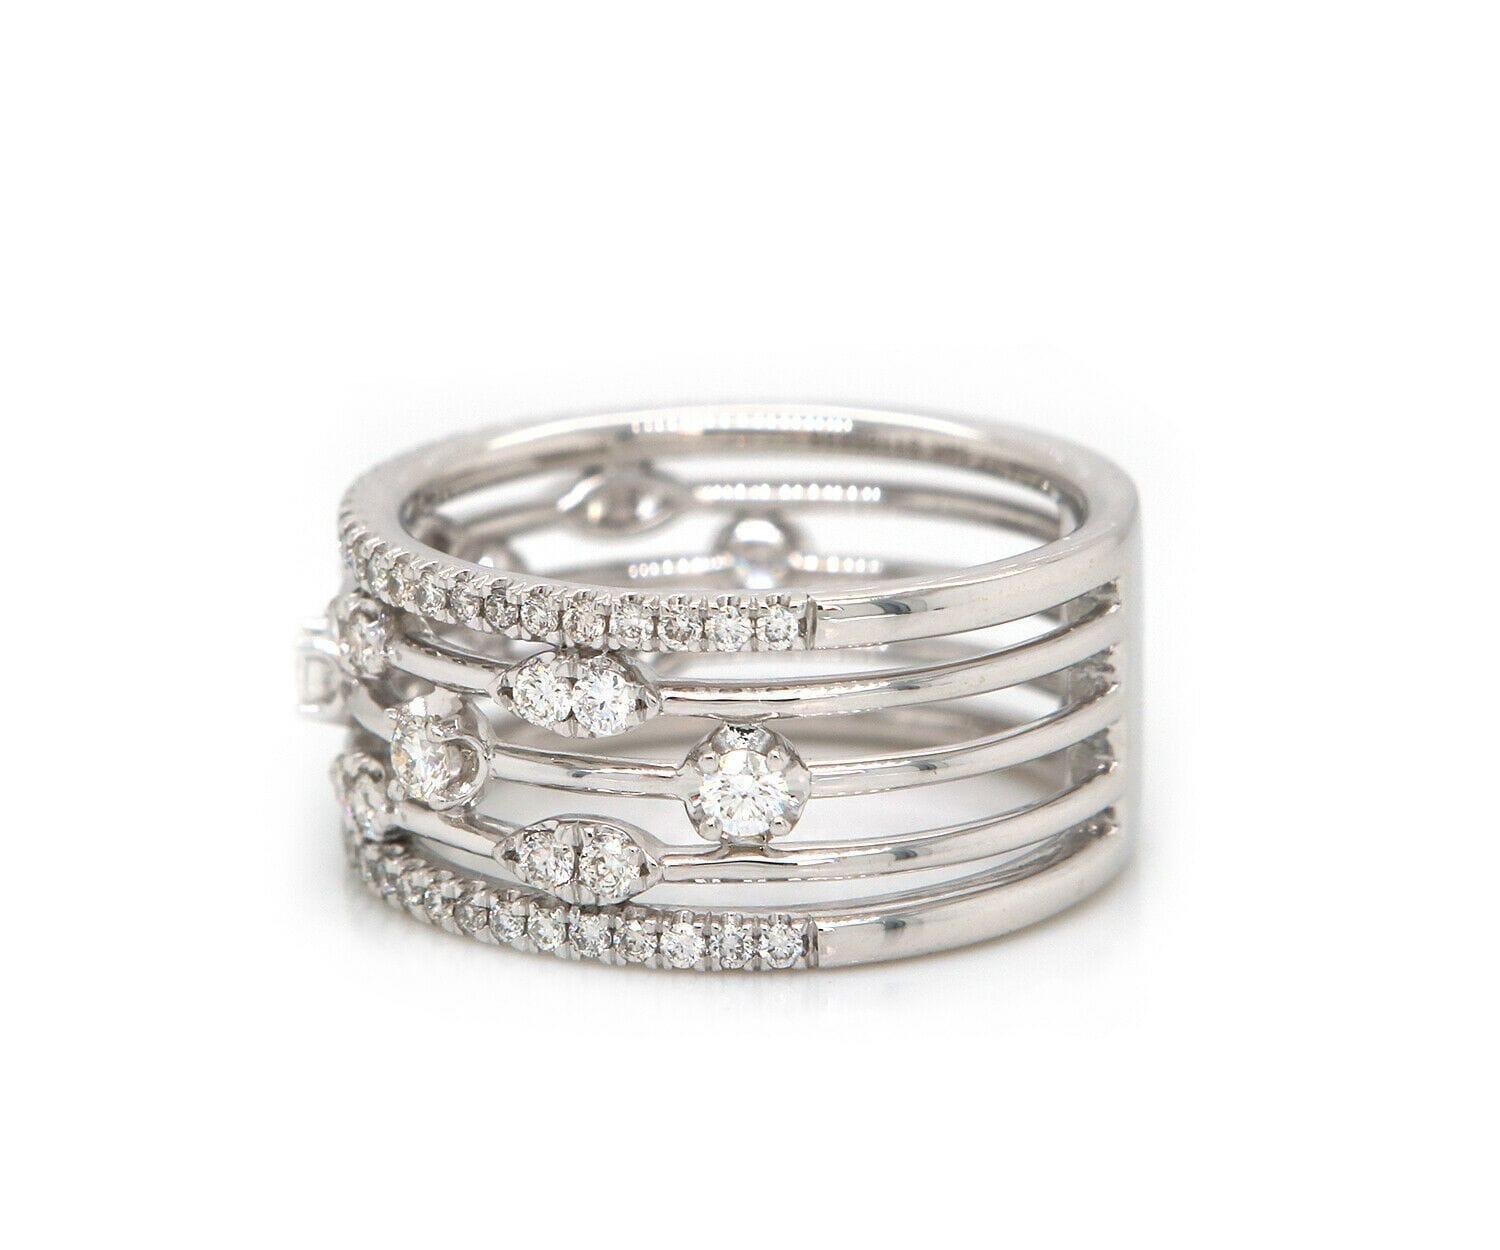 New Gabriel & Co. Diamond Open Five Row Ring in 14K

Gabriel & Co. Diamond Open Five Row Ring
14K White Gold
Diamonds Carat Weight: Approx. 0.73ctw
Clarity: SI2
Color: G – H
Ring Width: Approx. 9.4 MM
Ring Size: 6.25 (US)
Weight: Approx. 6.30